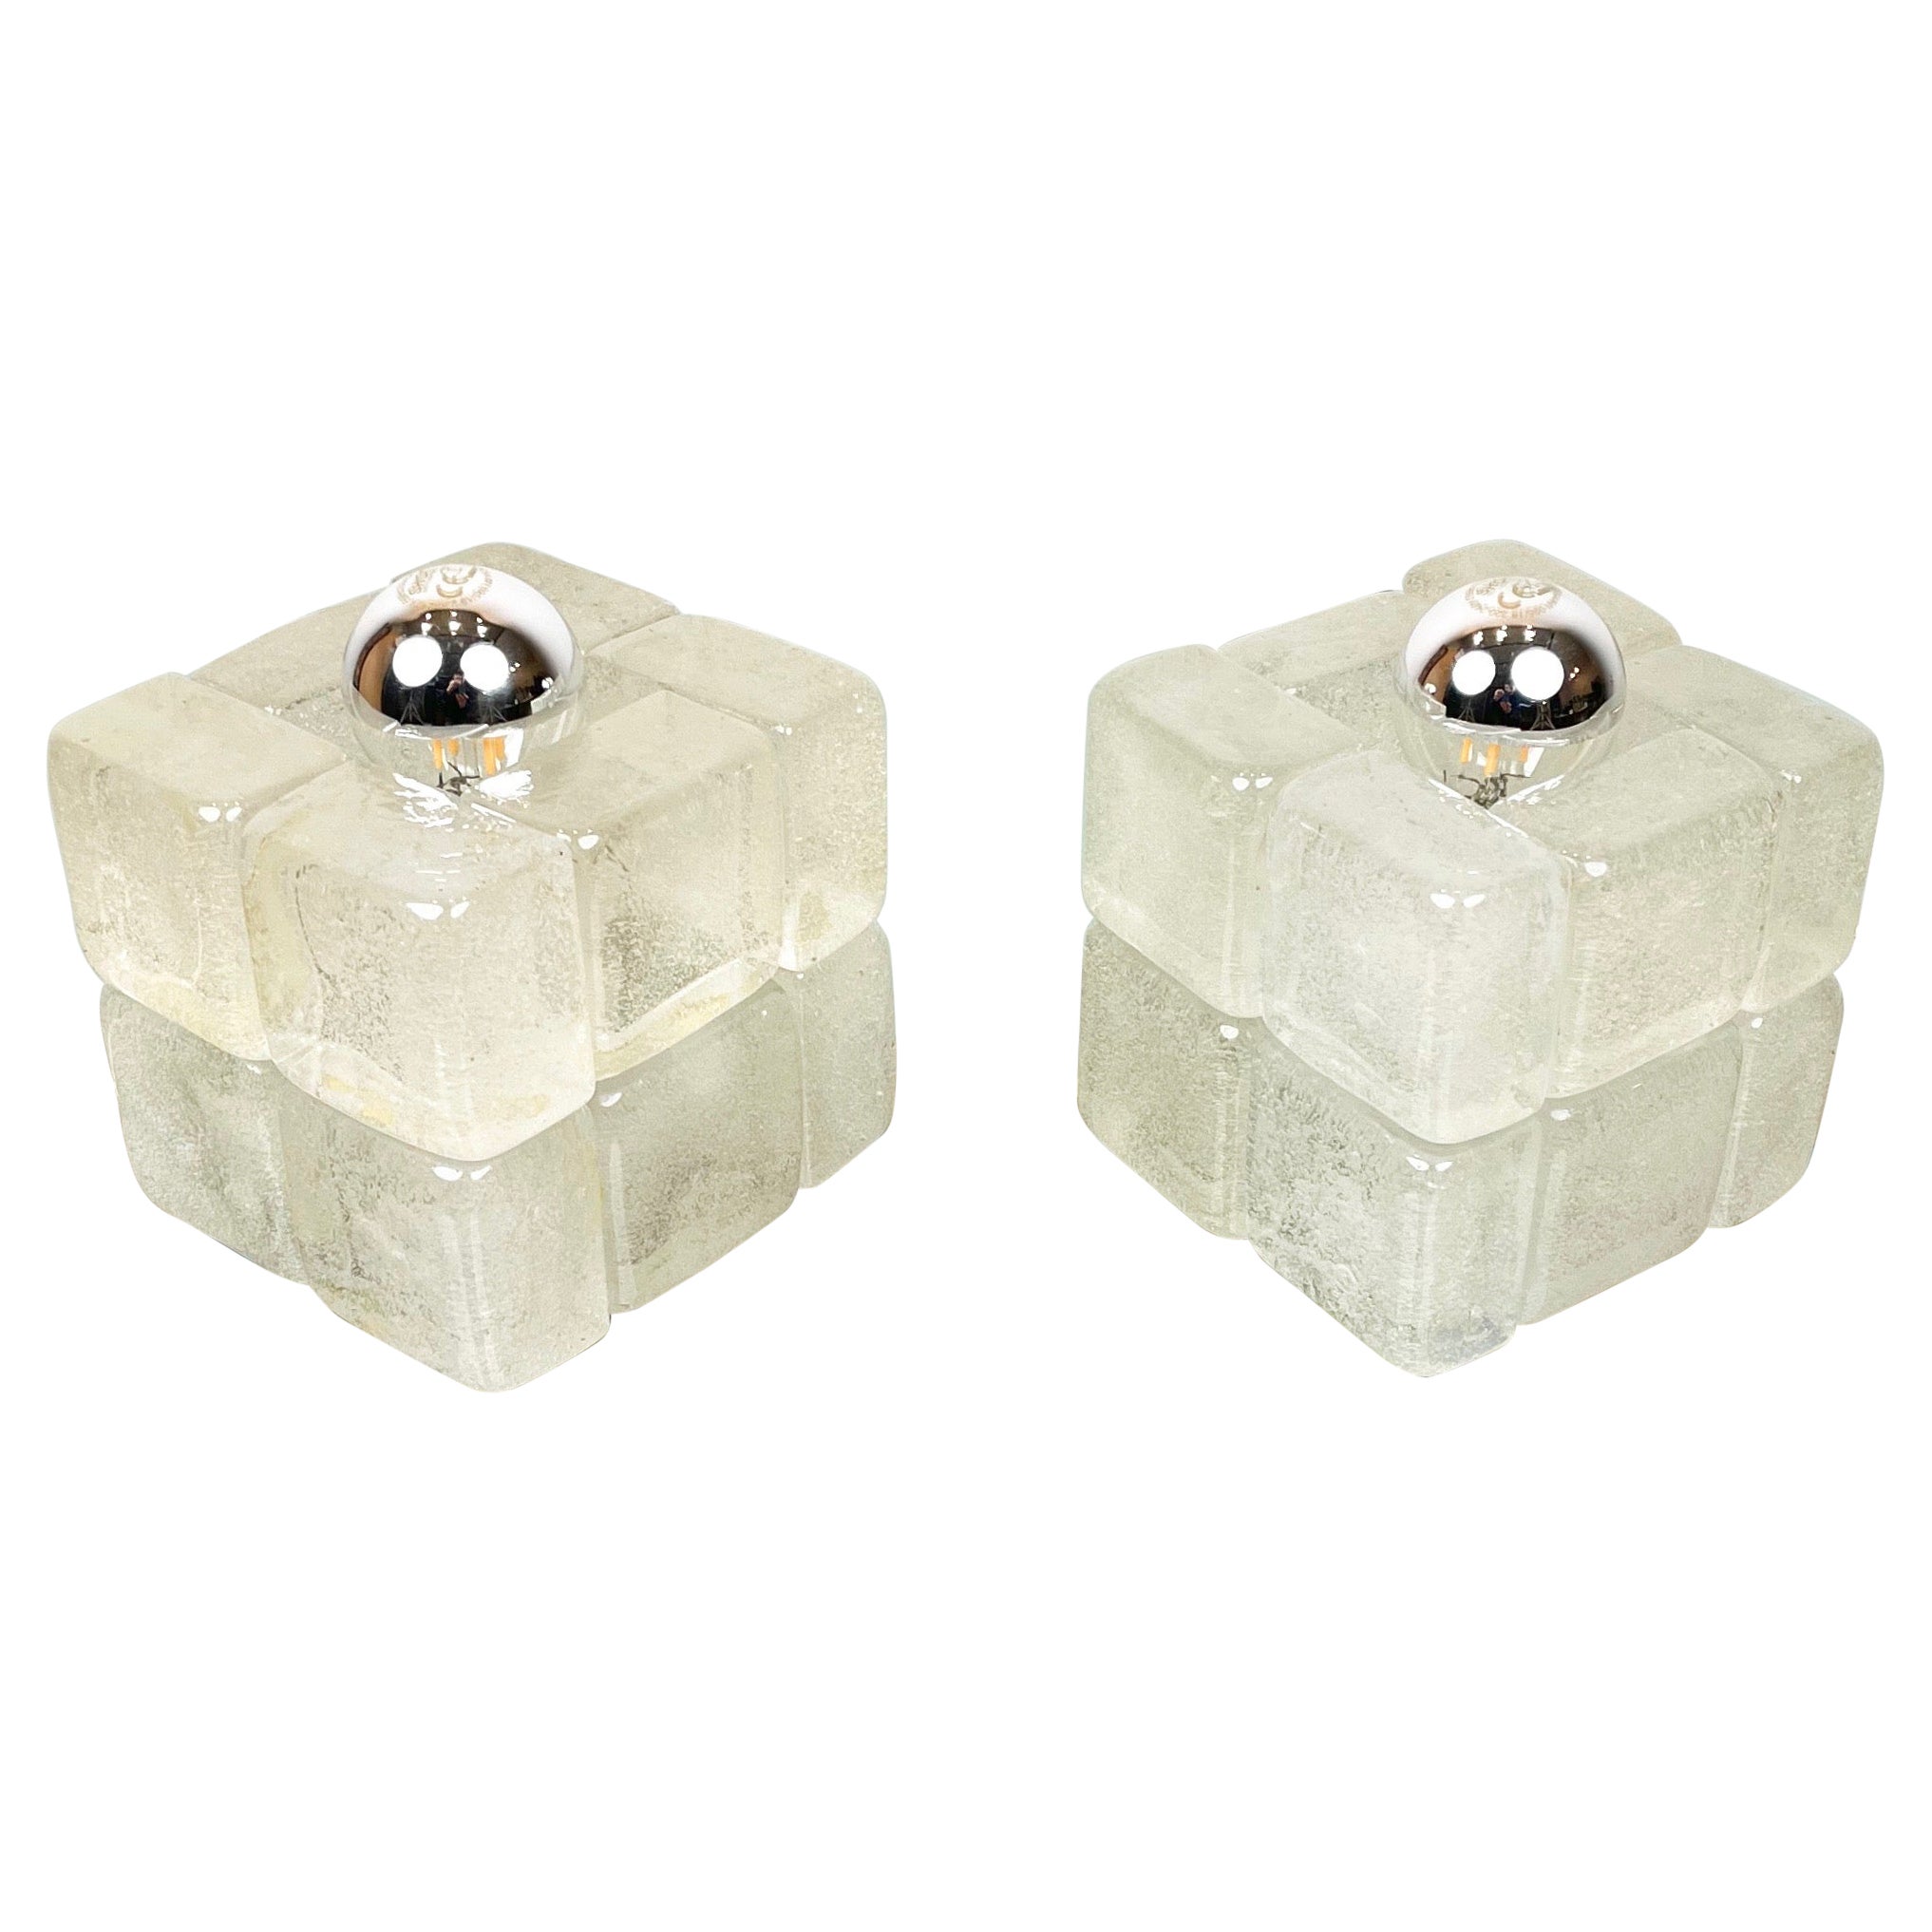 Pair of Murano Glass Cube Lamps by Albano Poli for Poliarte, Italy, 1970s